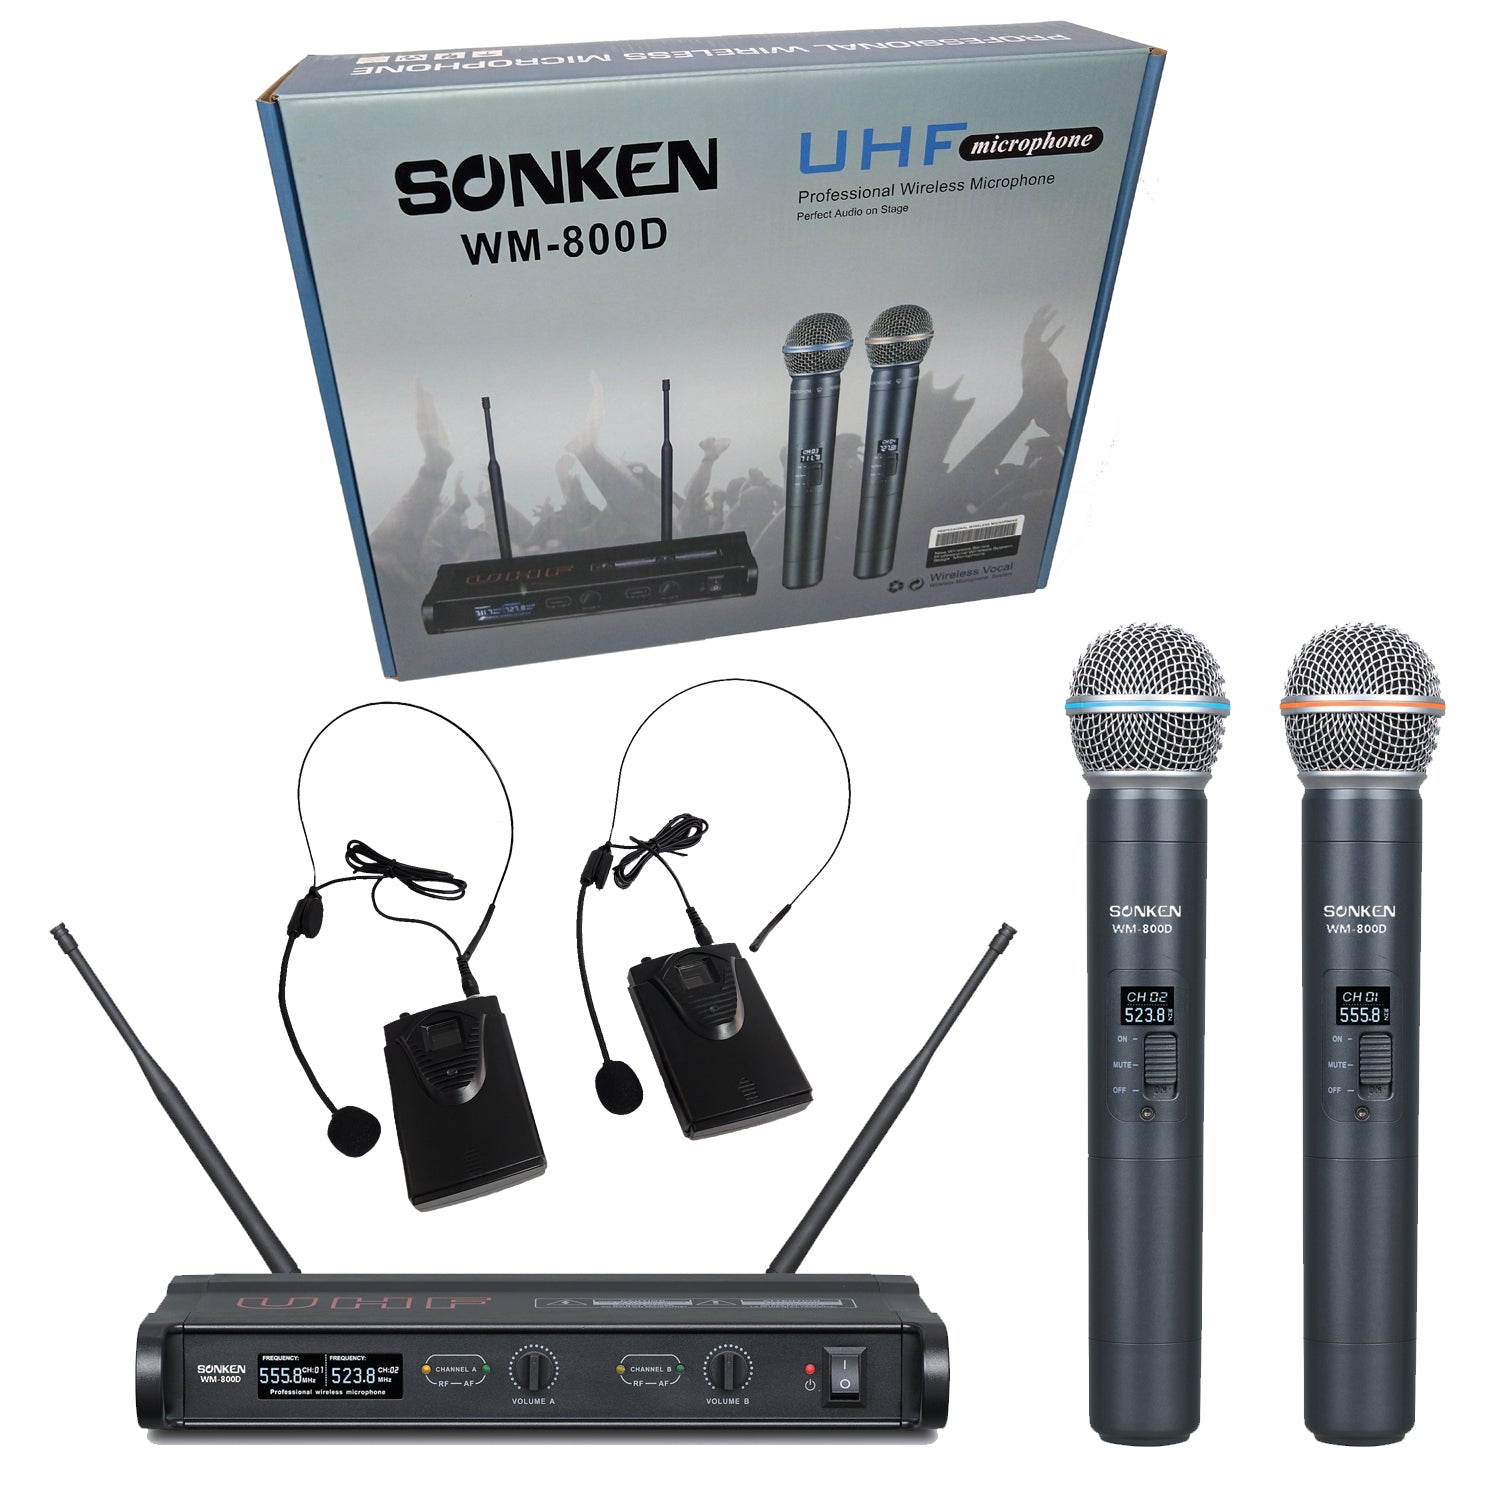 Sonken WM-800D Pro UHF Wireless Microphones (2) and (2) Body Packs + Headsets with Receiver Unit - Karaoke Home Entertainment